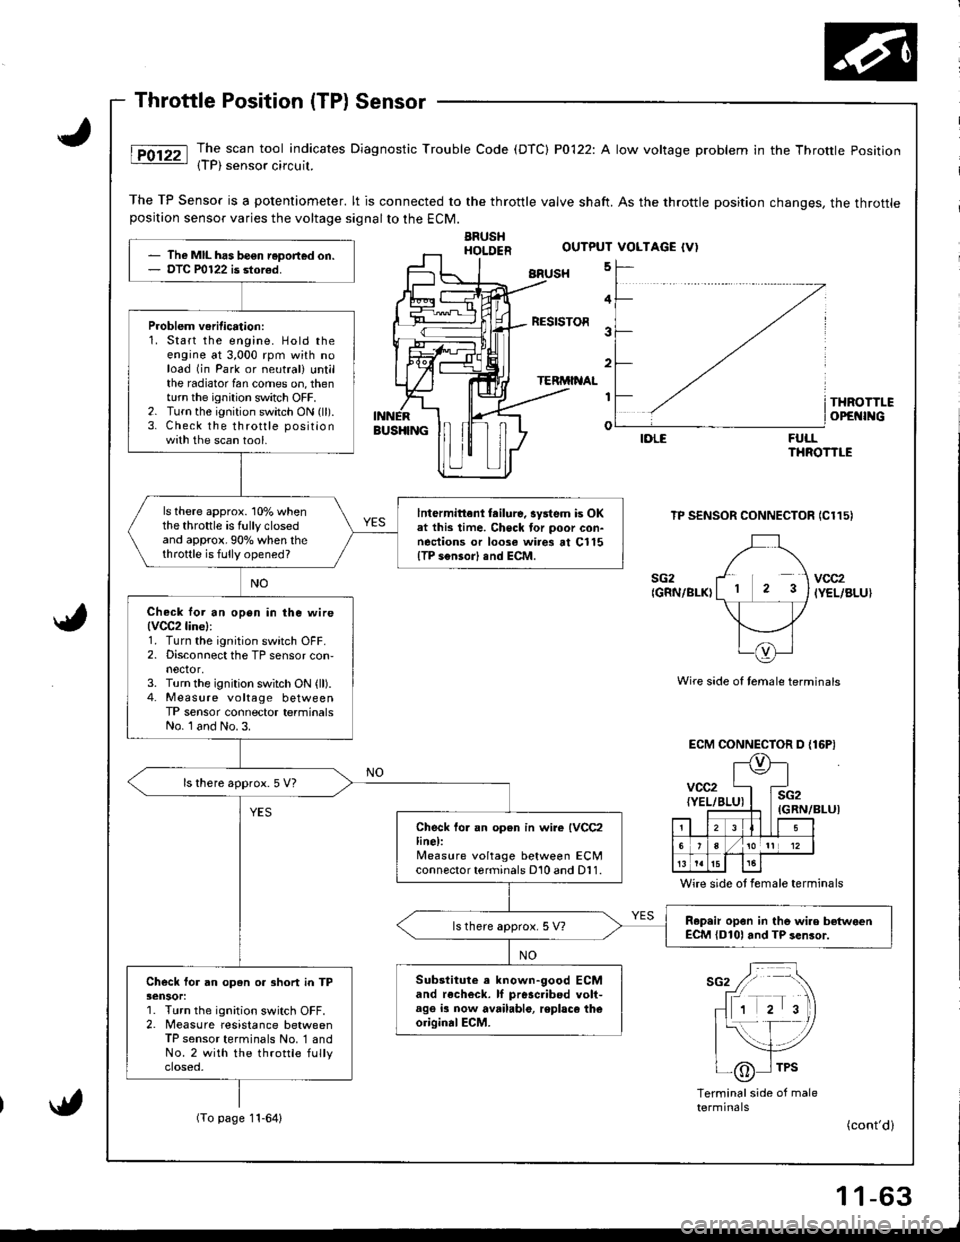 HONDA INTEGRA 1998 4.G Service Manual The scan tool indicates Diagnostic Trouble Code (DTC) P0122: A low voltage problem in the Throttle Position{TP) sensor circuil.
The TP Sensor is a potentiometer. lt is connected to the throttle valve 